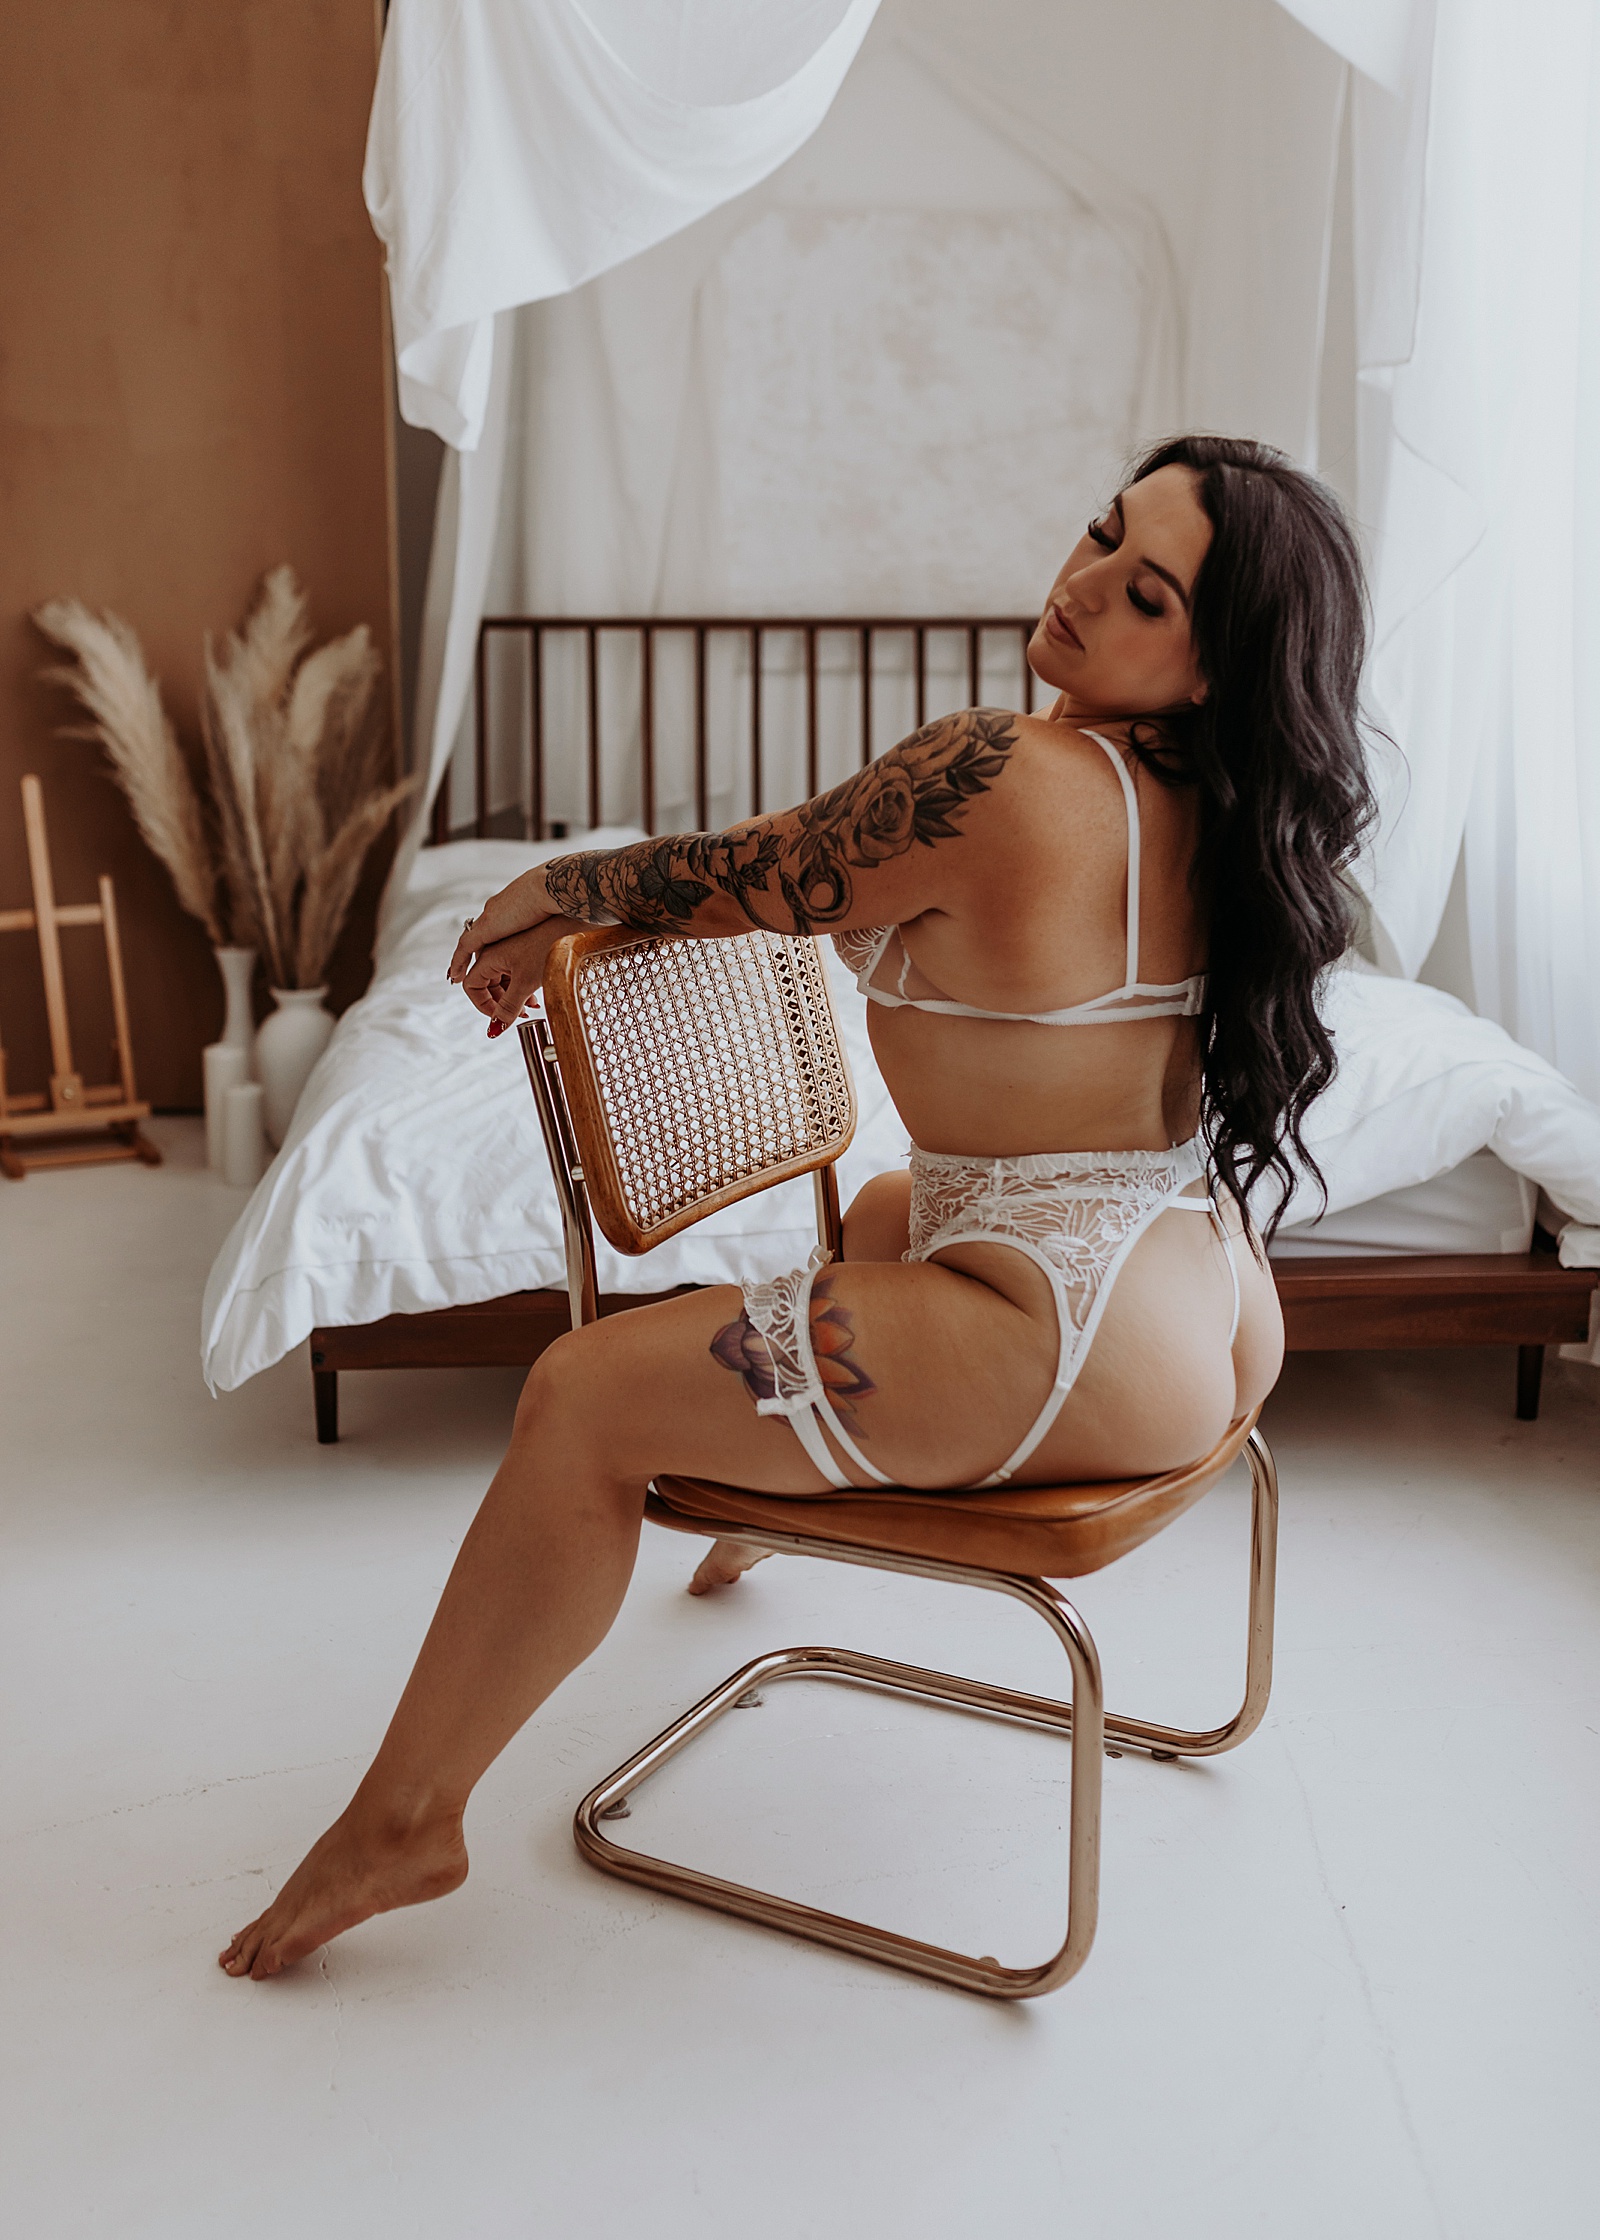 Woman sitting on a chair in white lace lingerie by a Minneapolis boudoir photographer